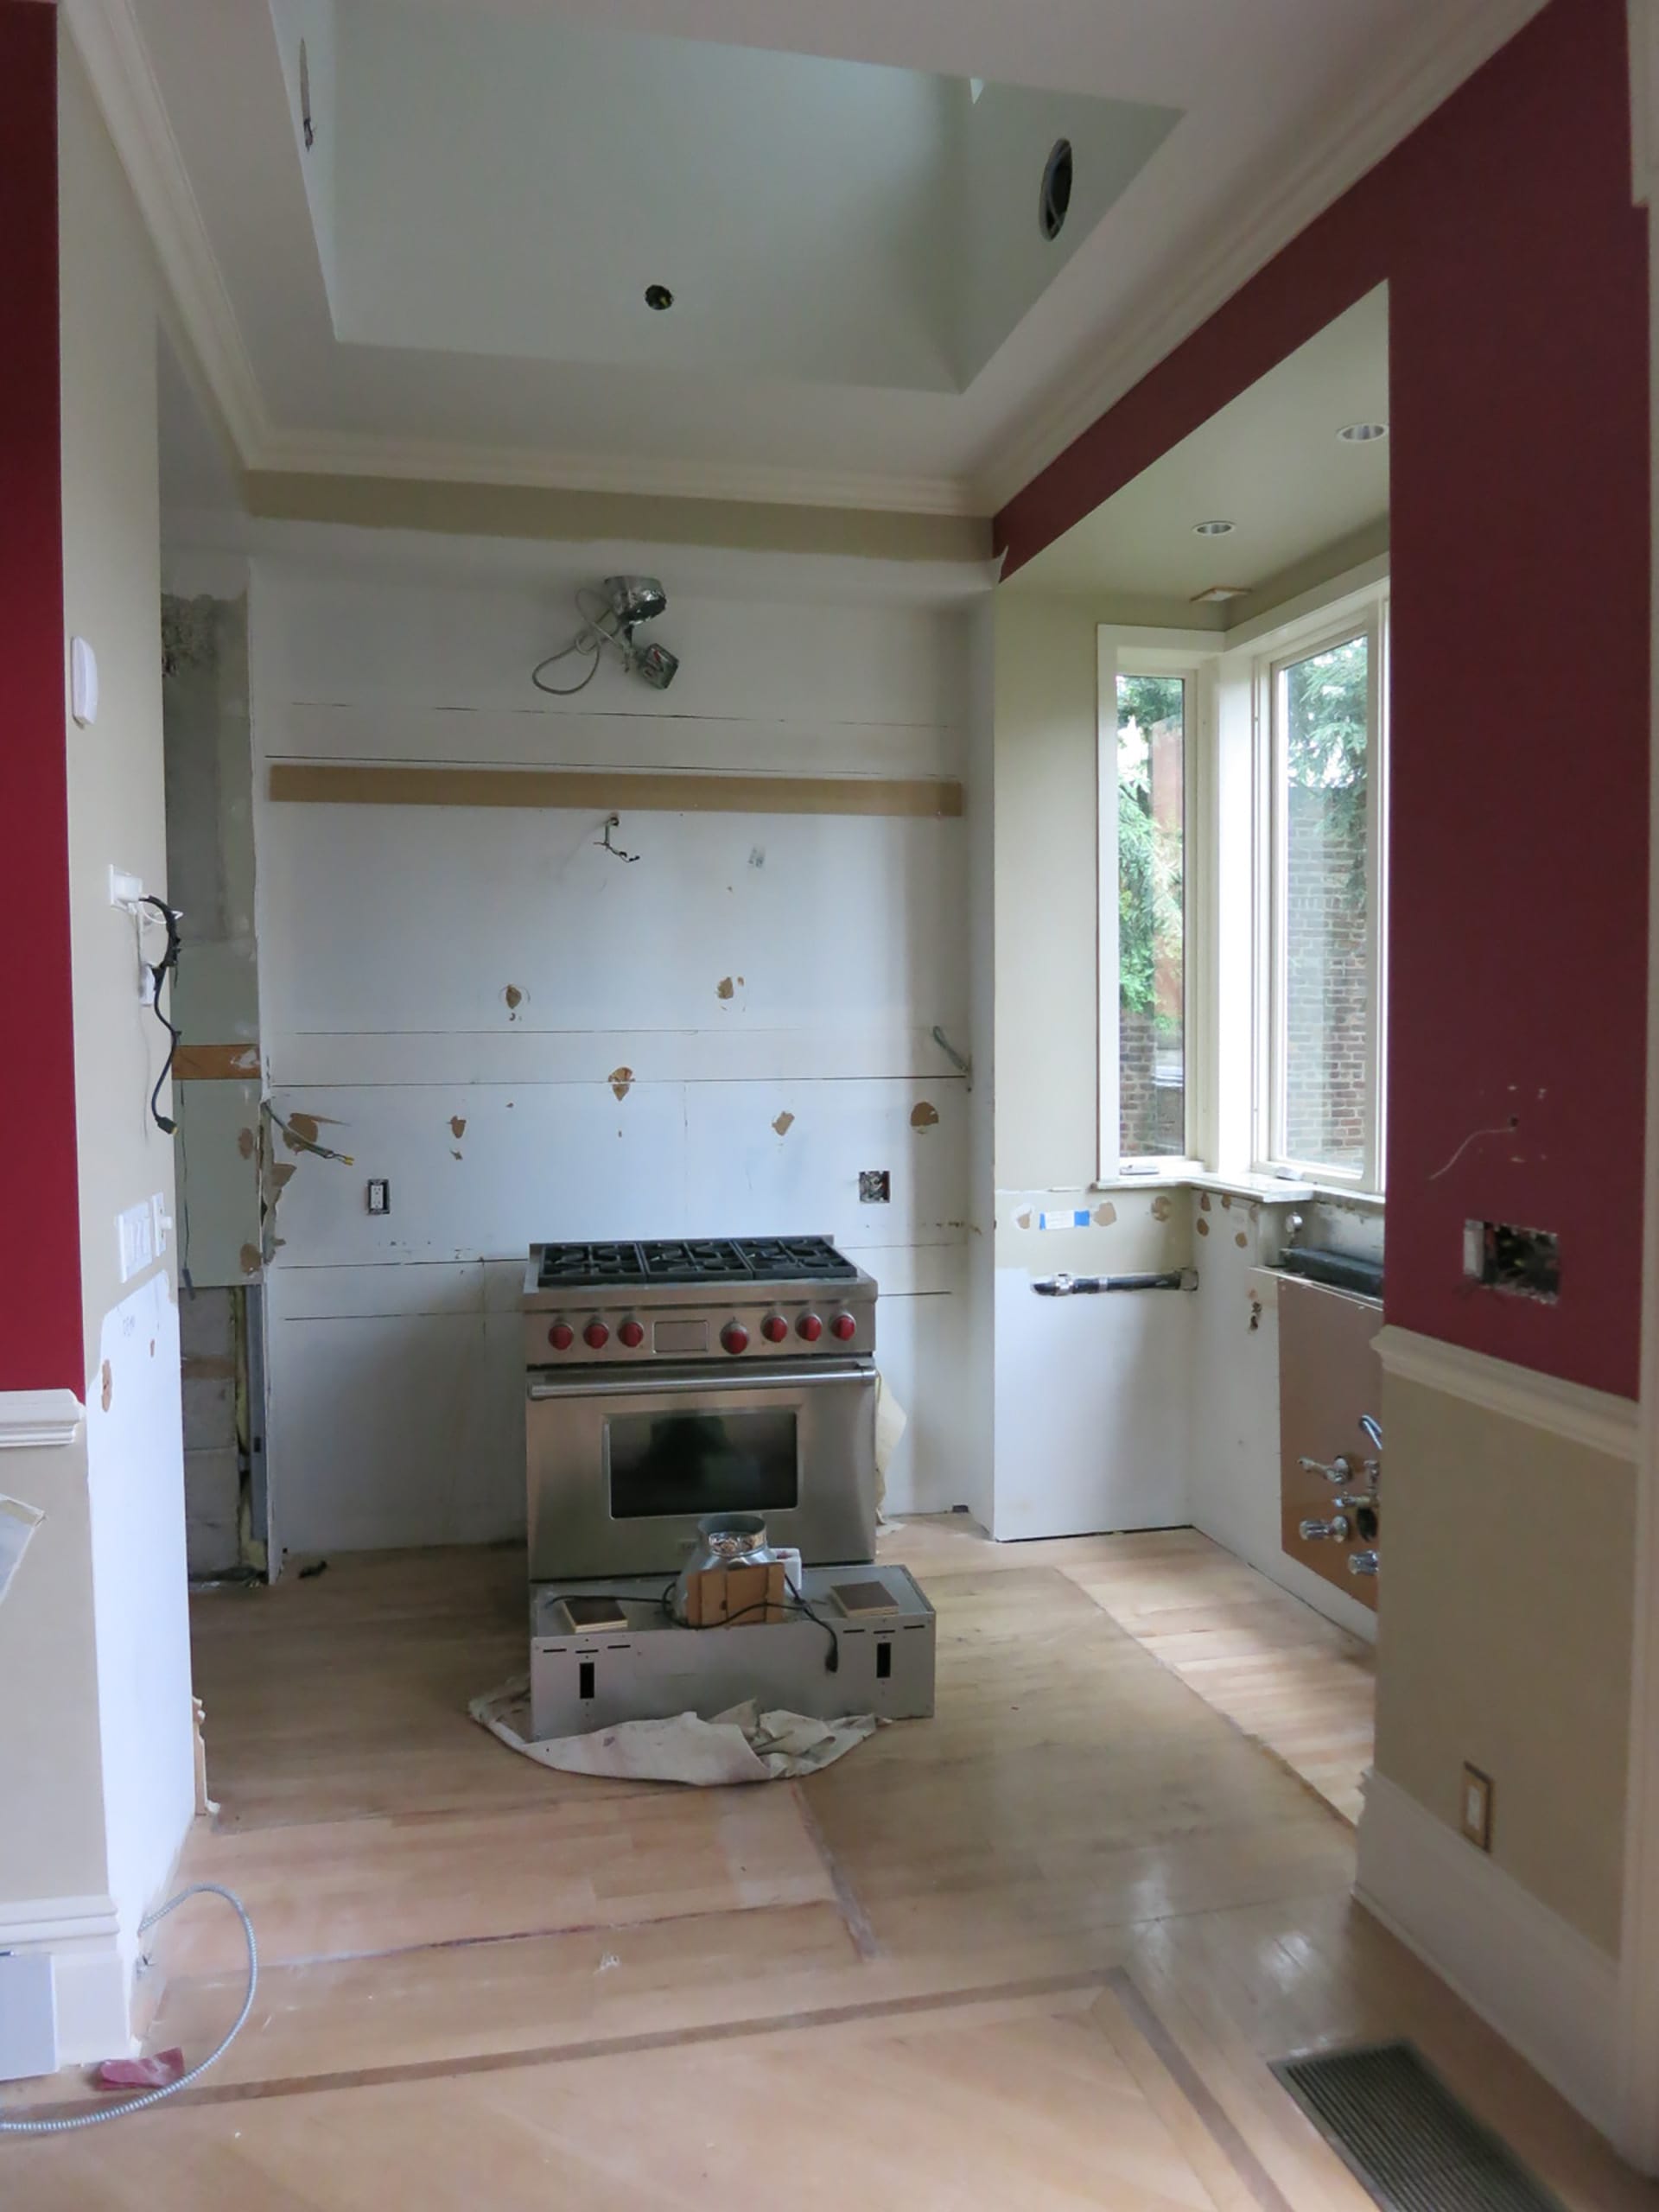 Kitchen at the rear of a Brooklyn Heights townhouse before our renovation